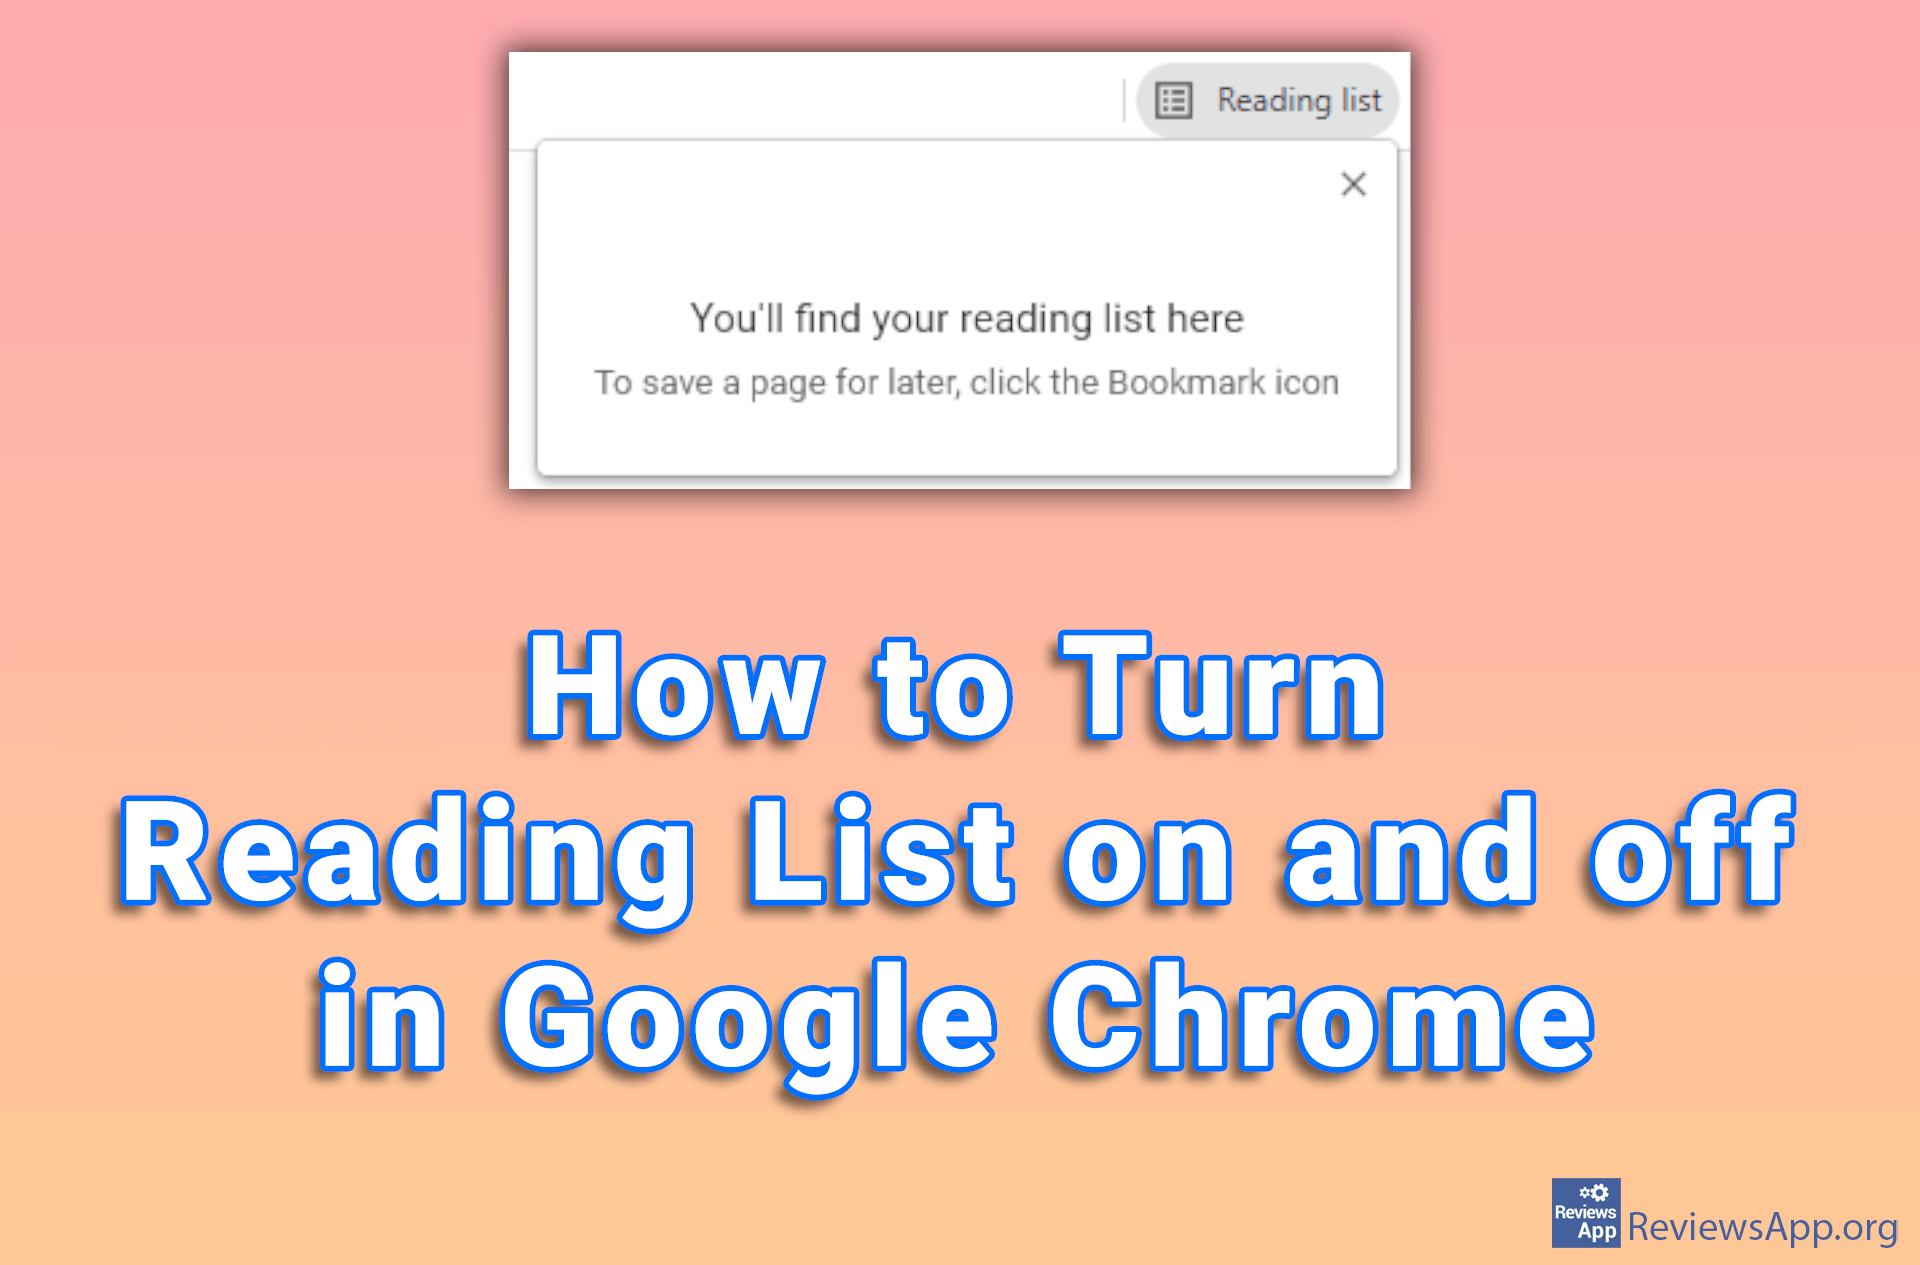 How to Turn Reading List on and off in Google Chrome